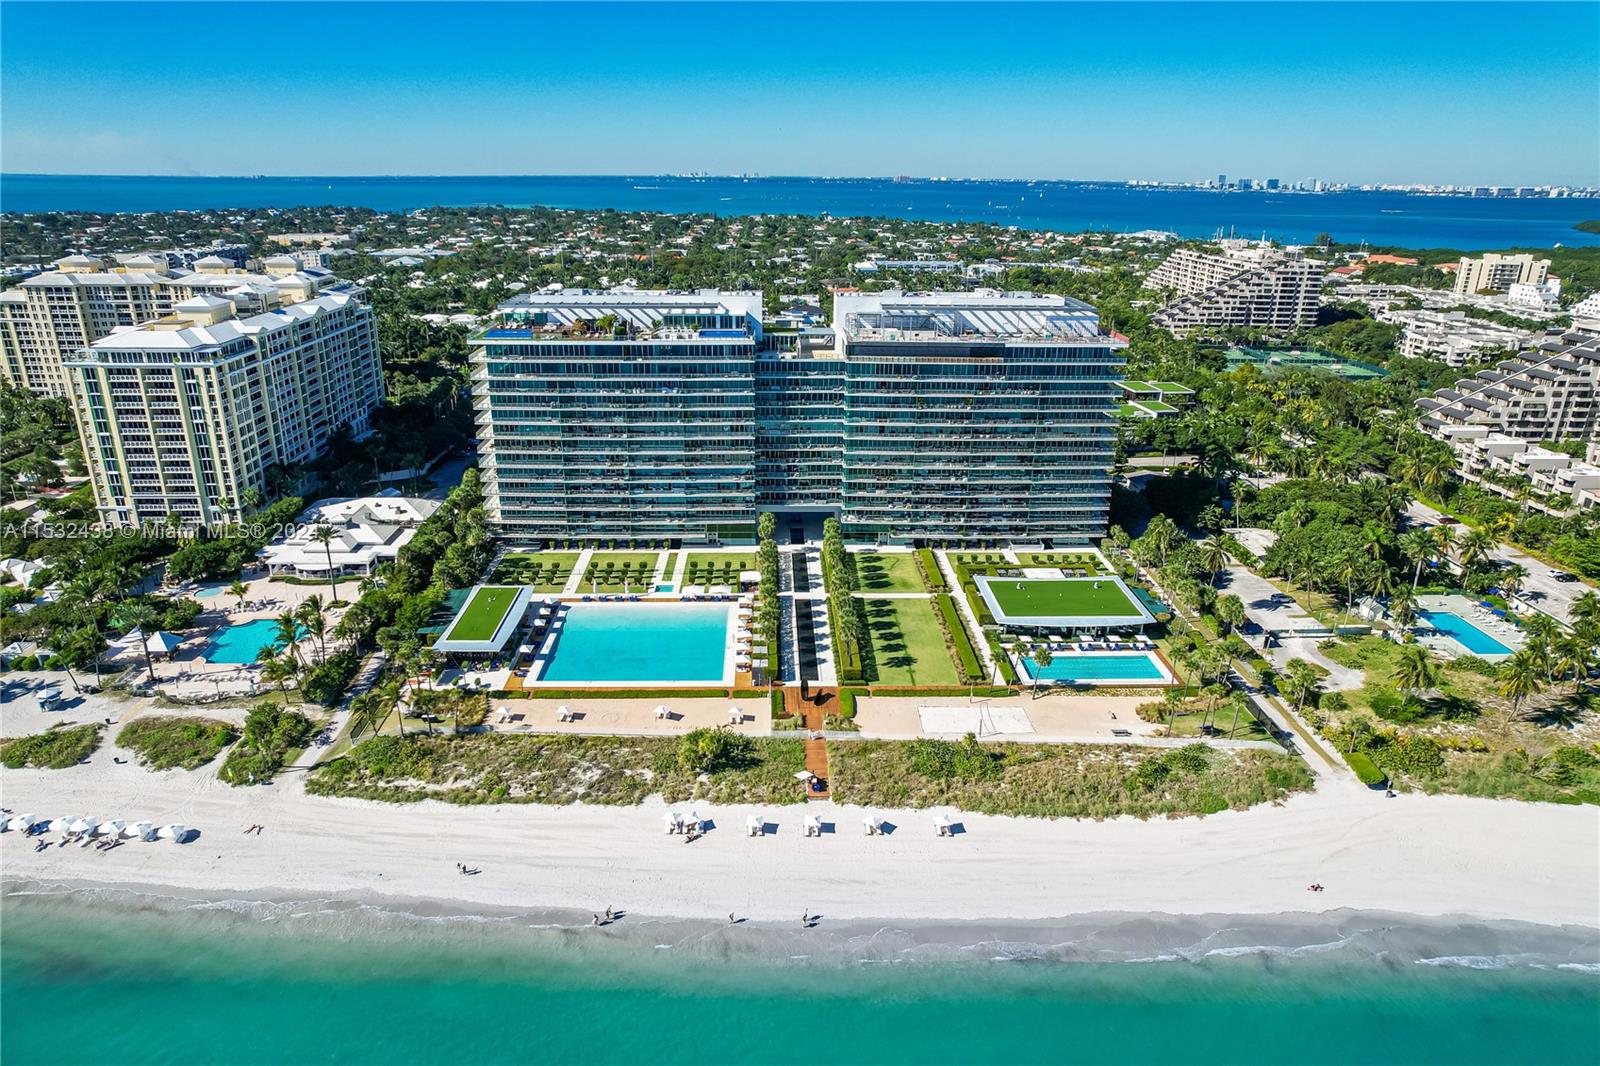 Welcome to your dream home at Oceana Key Biscayne, a mesmerizing seaside escape that defines unparalleled luxury and tranquility. This stunning unit, fully furnished and ready to move in offers an expansive layout with 3 large bedrooms, 5 bathrooms, maid quarter and an extensive wrap around balcony with breathtaking views of the ocean. The open-concept living area seamlessly connects to a kitchen with top-of-the-line appliances for your culinary adventures. Floor to ceiling with natural light and breathtaking views of the clear ocean waters and lush landscapes that surround this prestigious address. 500-foot private beach, pool, cabanas, restaurant, lap pool, fitness, spa and tennis. Make this haven your new home in the unique sophistication and charm that Key Biscayne has to offer!